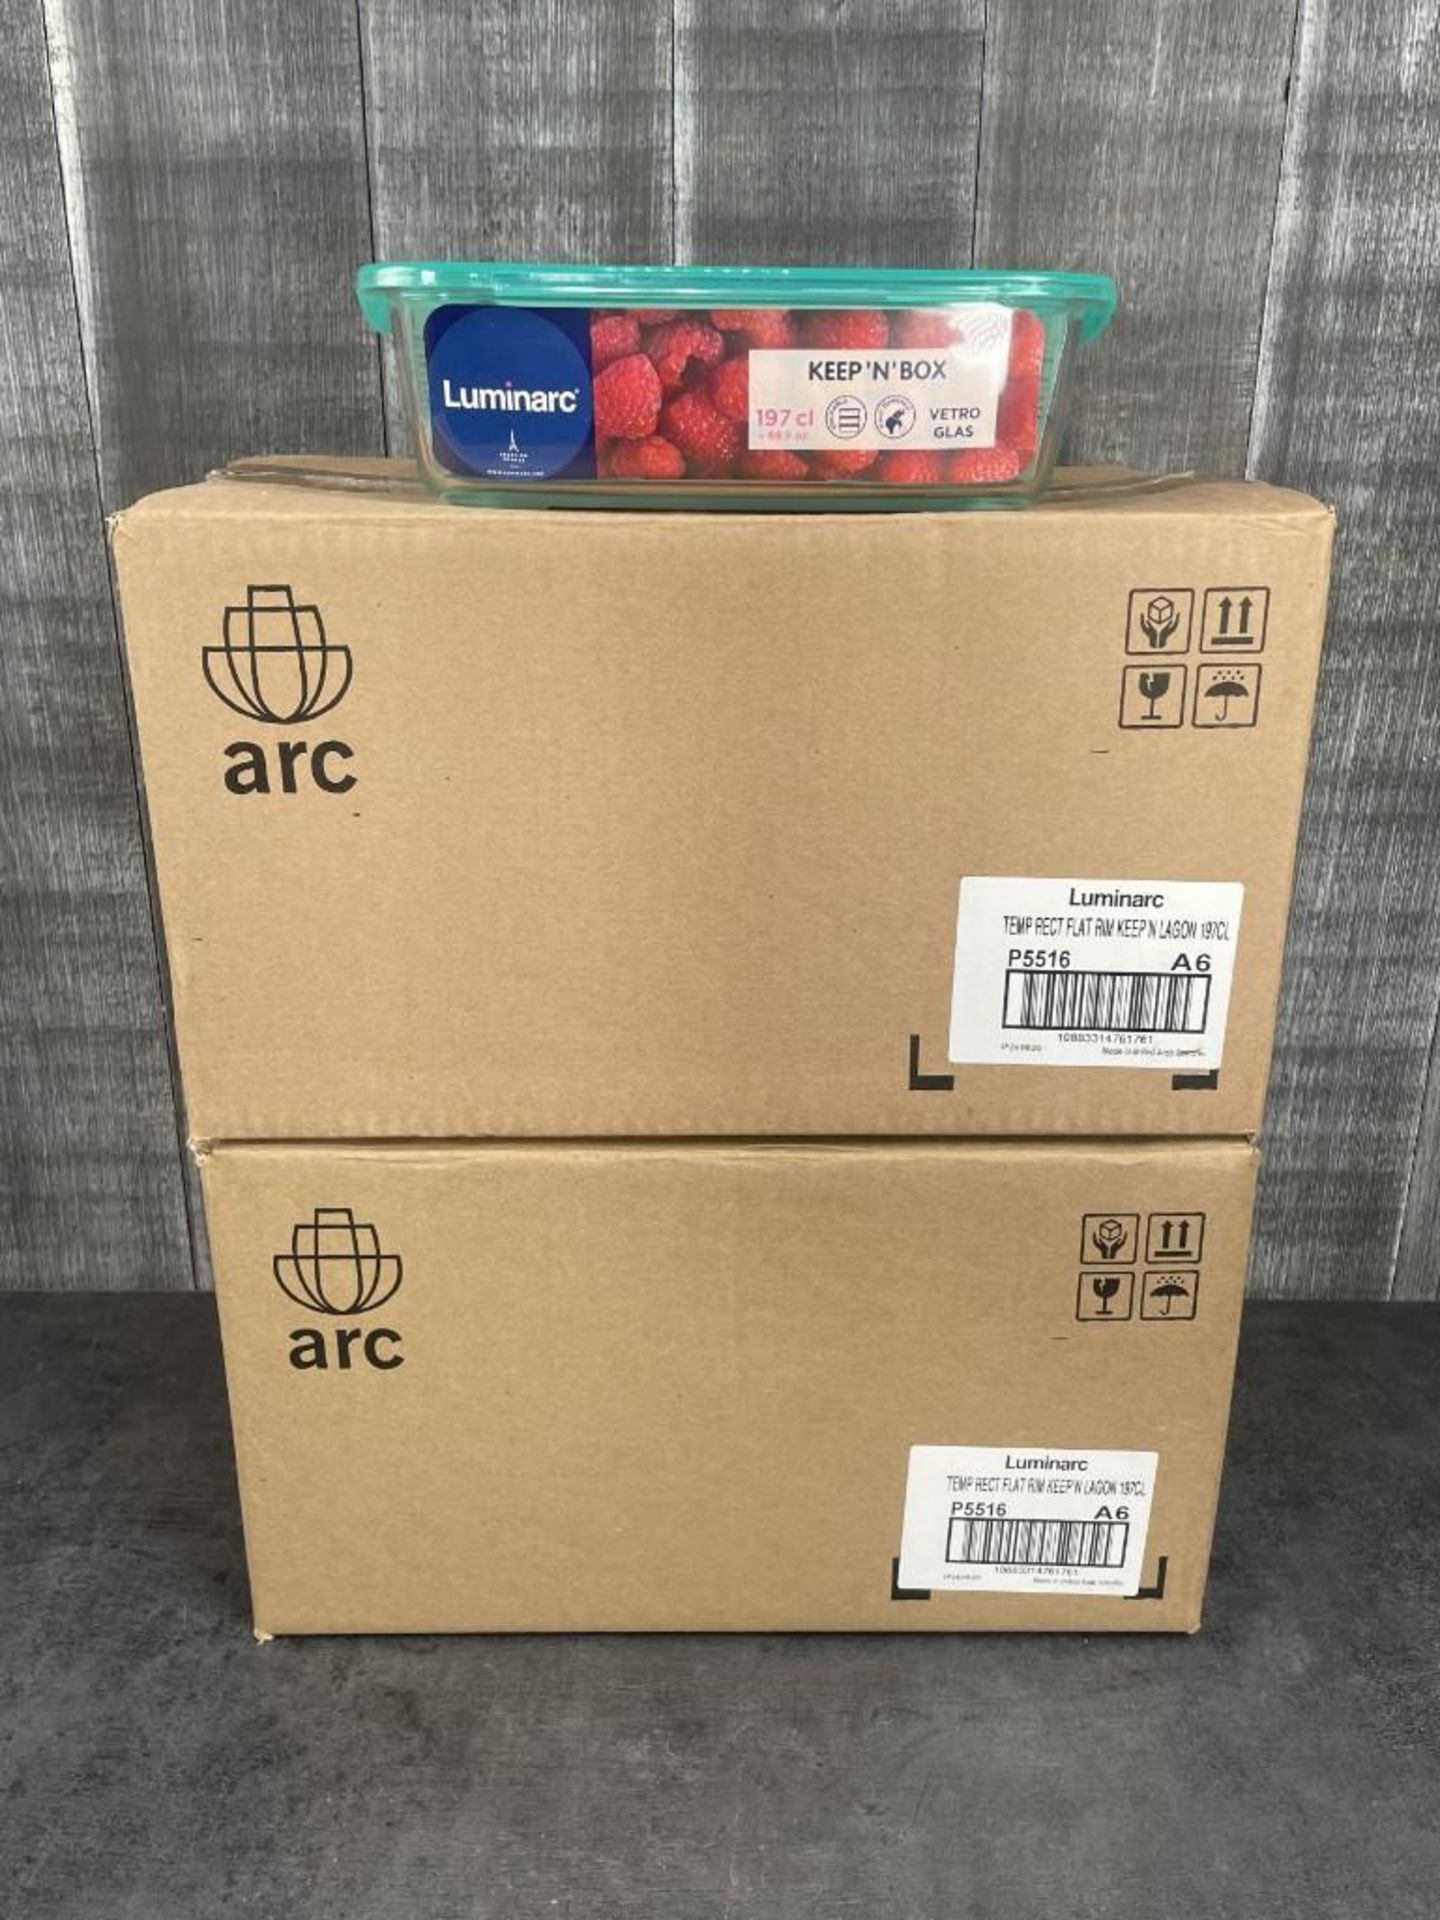 1.97L GLASS RECTANGULAR KEEP N BOXES, ARCOROC P5516 - LOT OF 12 (2 CASES) - Image 2 of 8